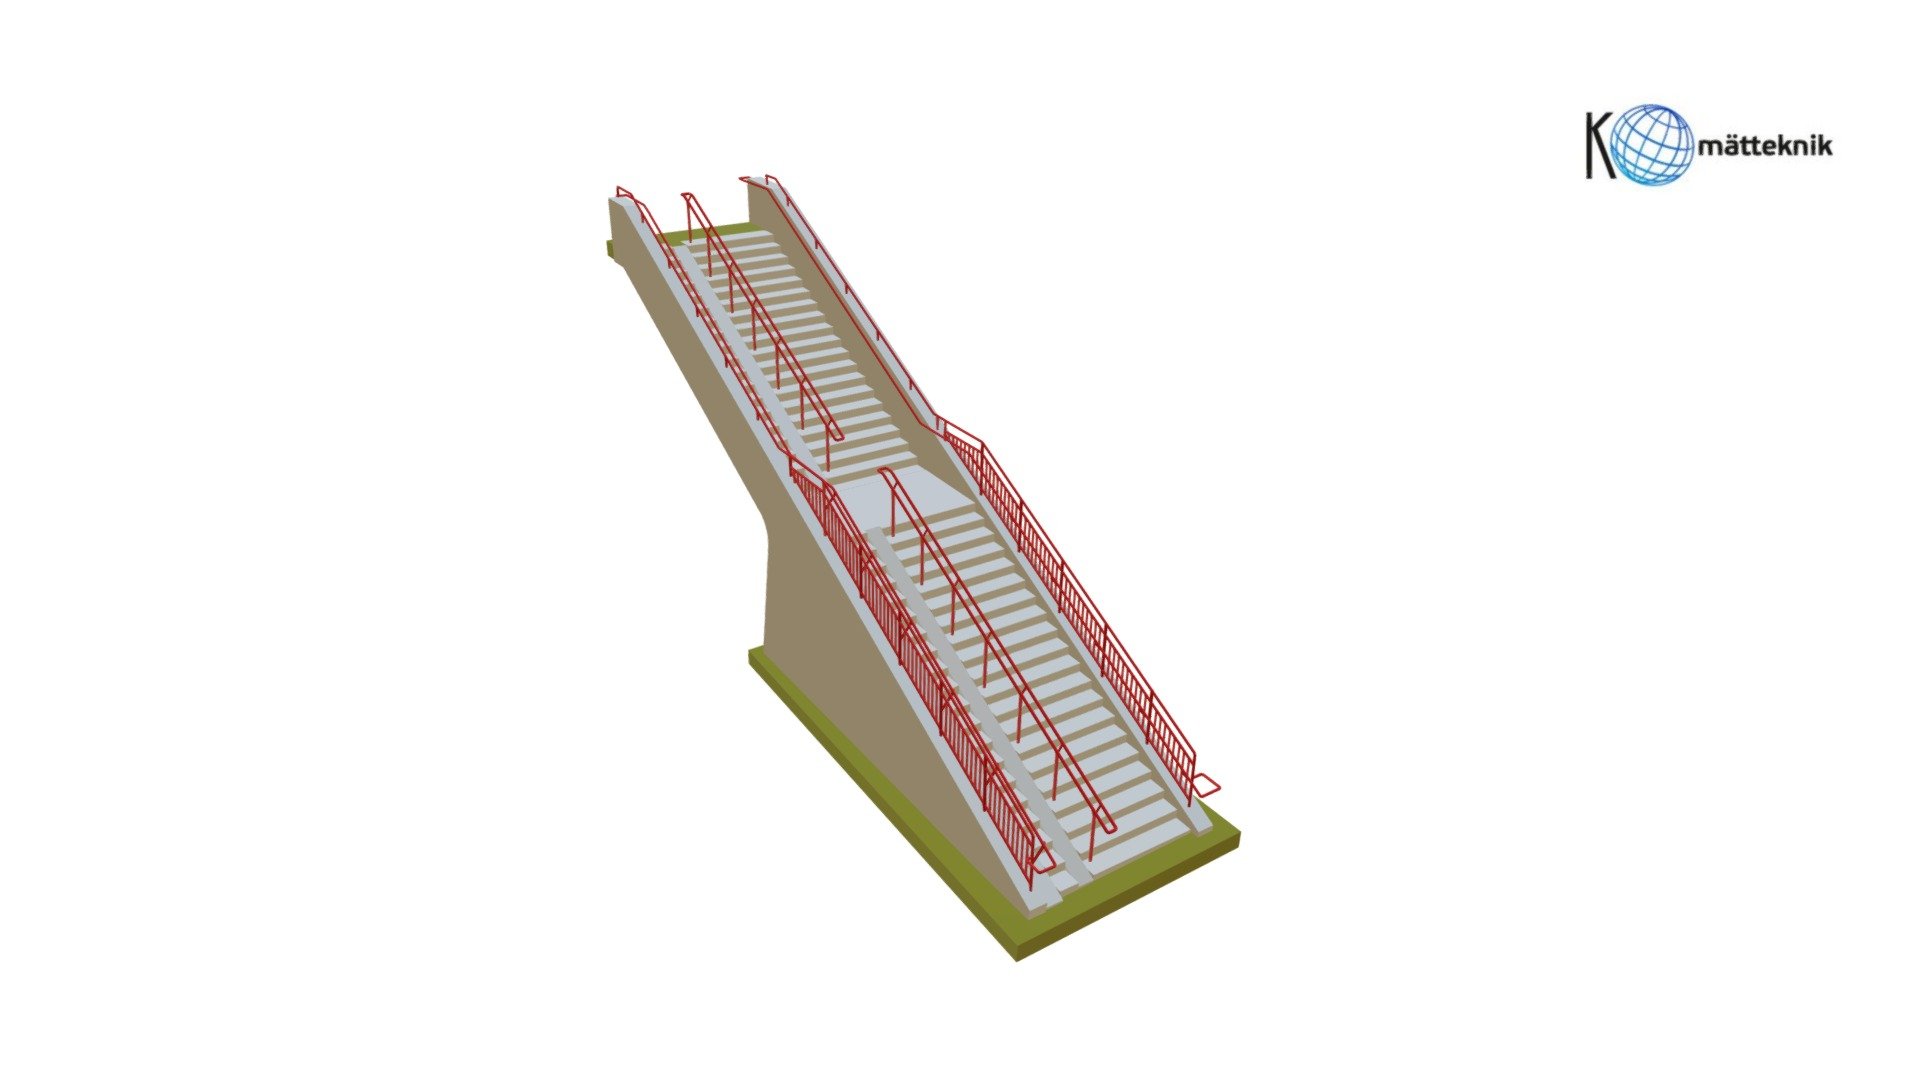 Staircase model made from pointcloud